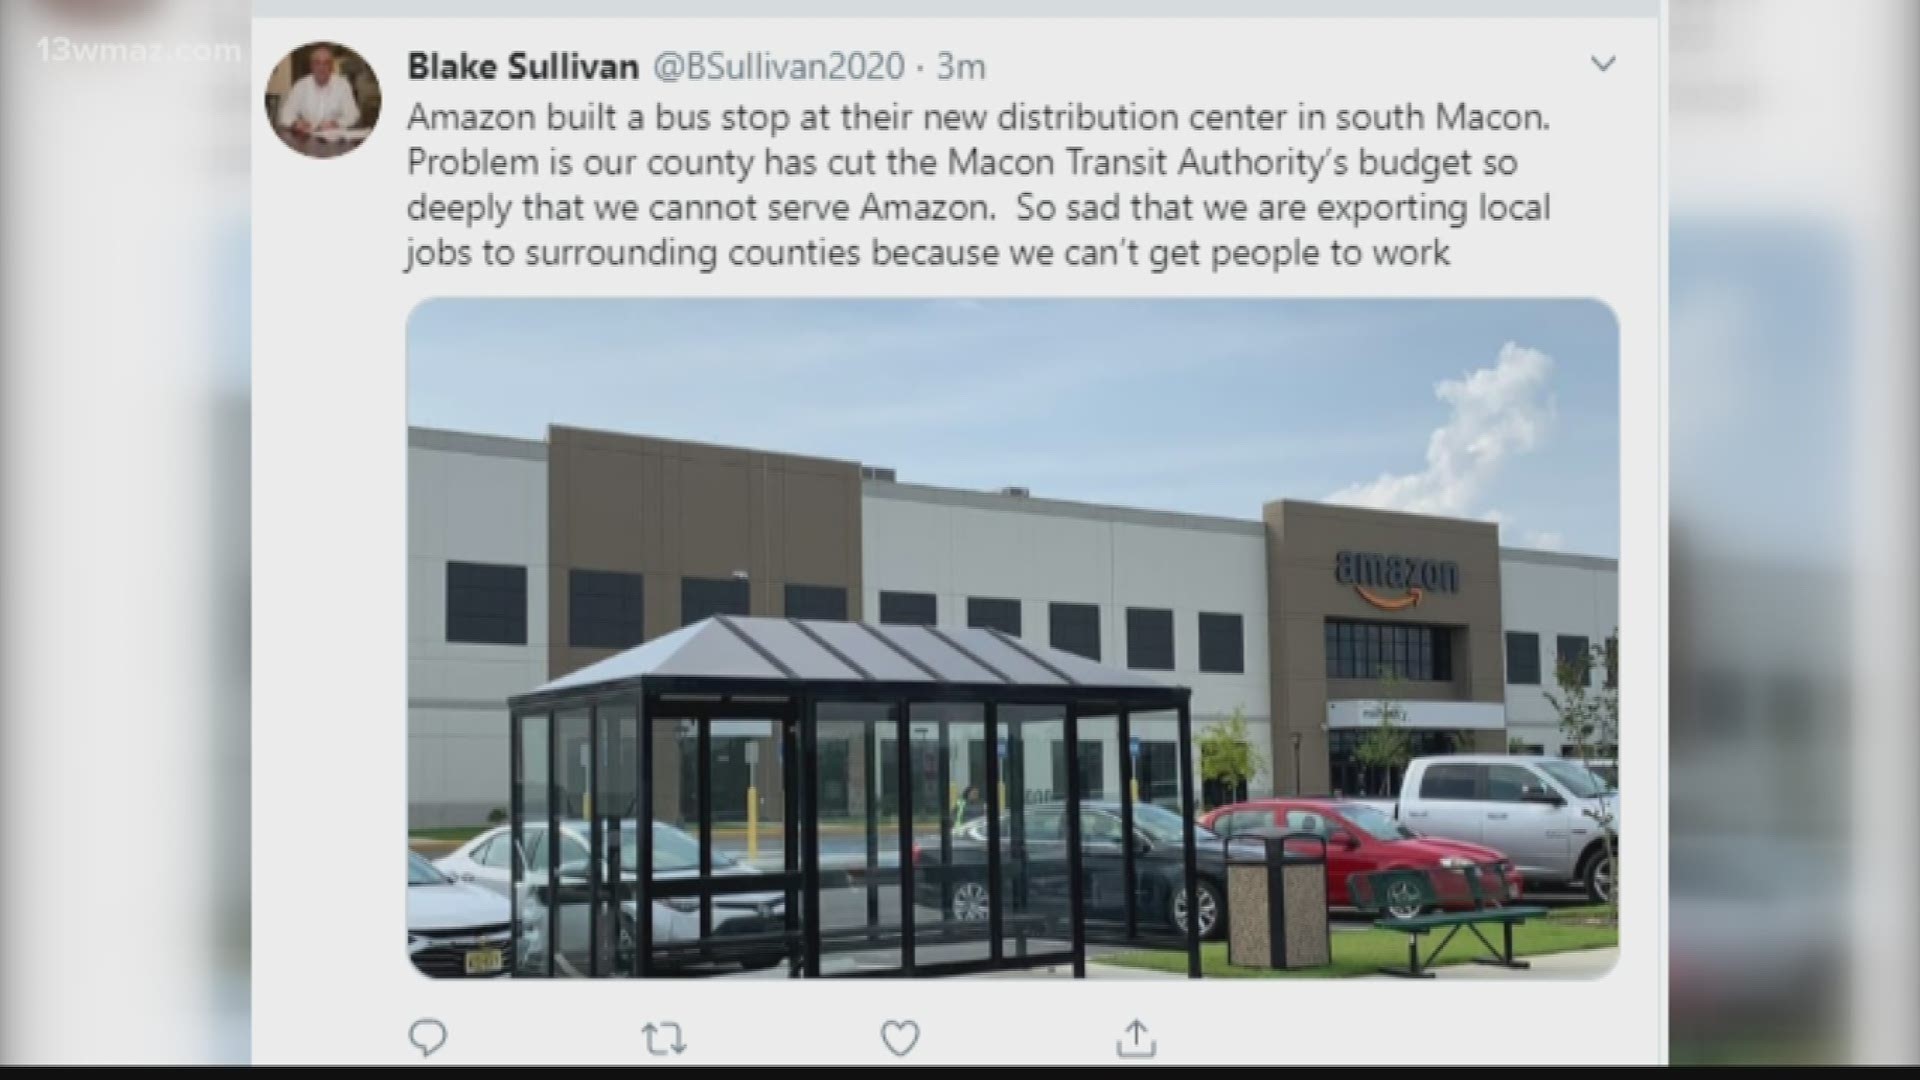 Businessman Blake Sullivan, who plans to run for mayor, posted a tweet saying Amazon built a bus stop at their new distribution center in south Macon. He says the problem is the county has cut Macon Transit Authority's budget so deeply that they cannot serve Amazon. Is this true?